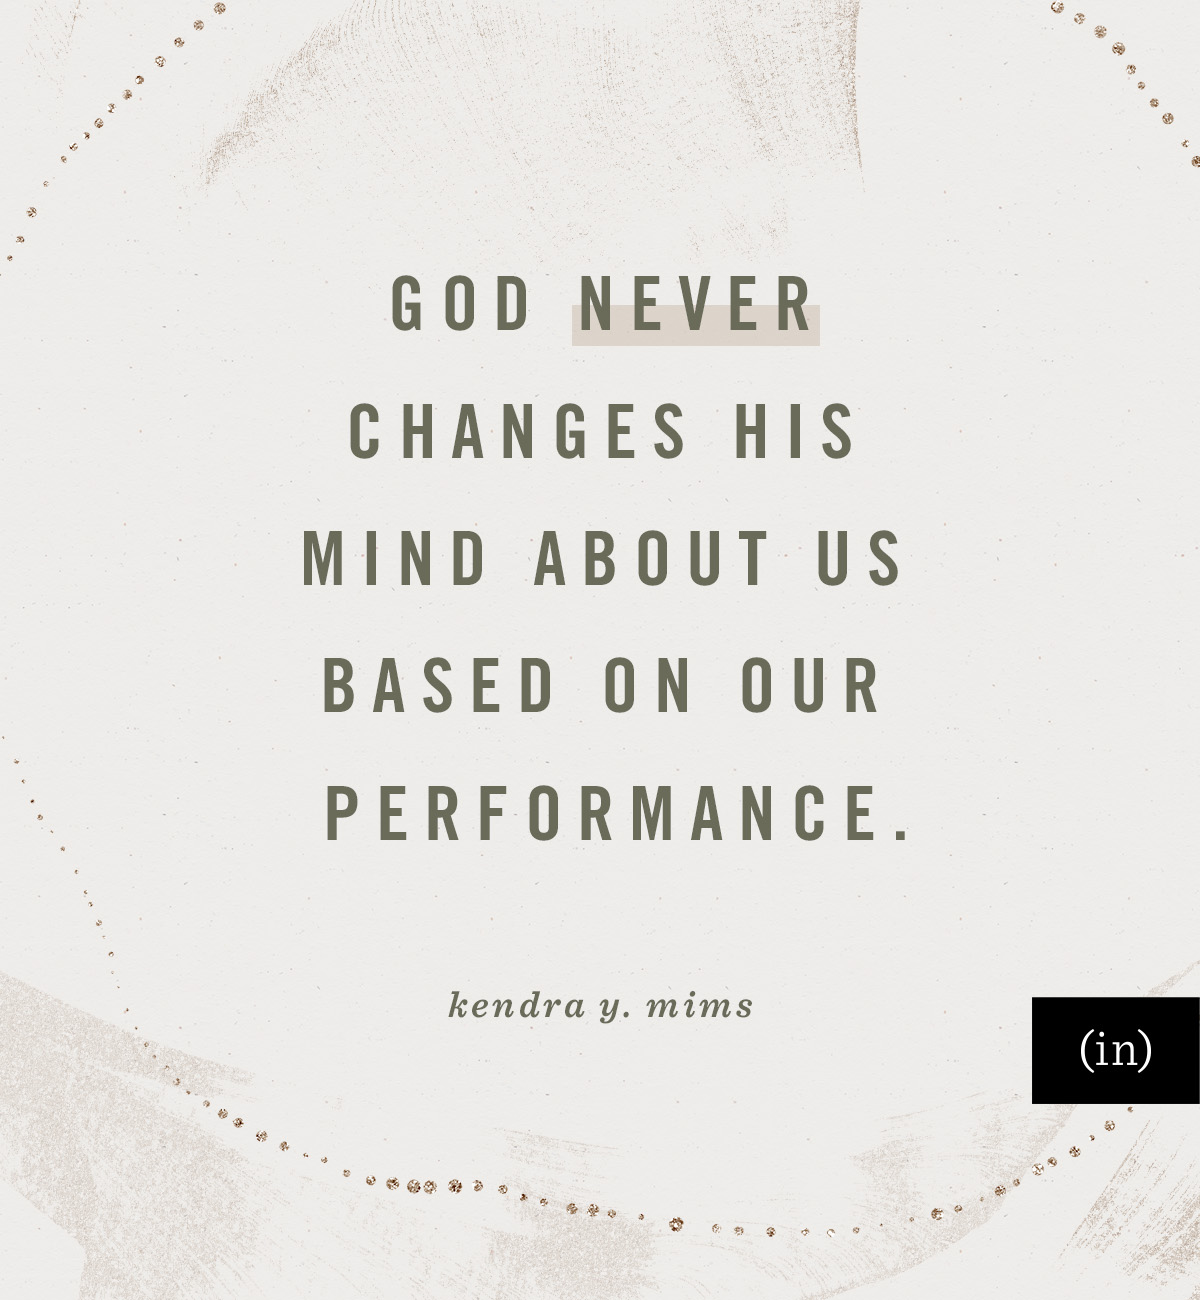 God never changes His mind about us based on our performance. -Kendra Y. Mims